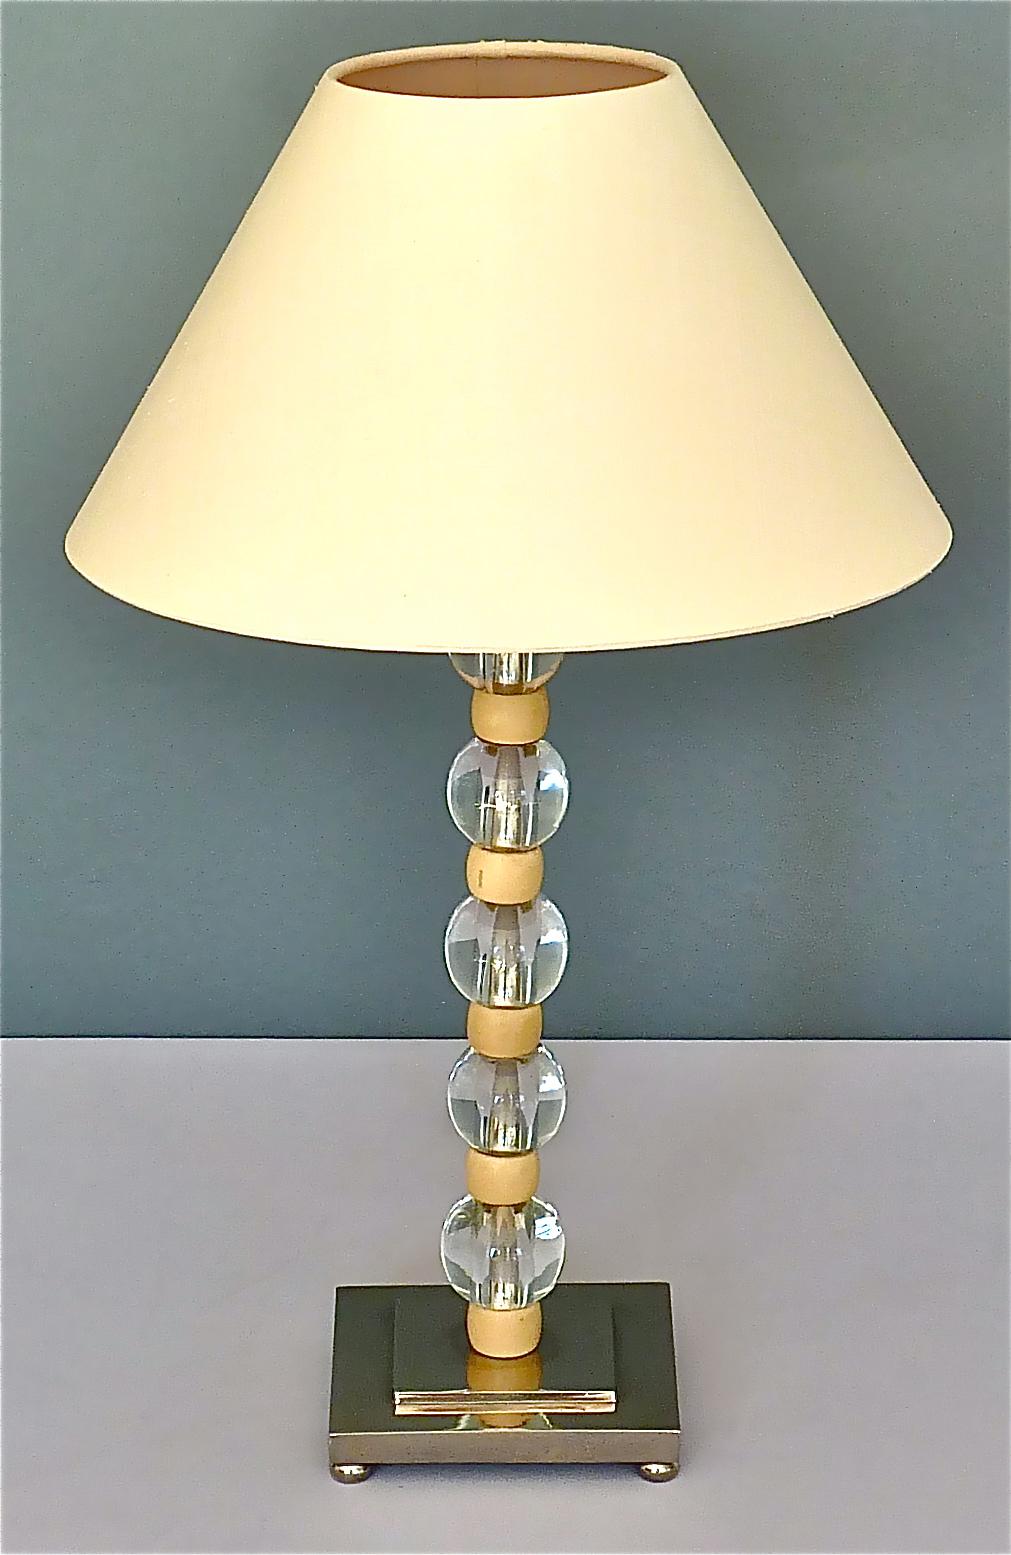 French Art Deco Adnet Baccarat Style Table Lamp Chrome Glass Ivory Color 1930s For Sale 6